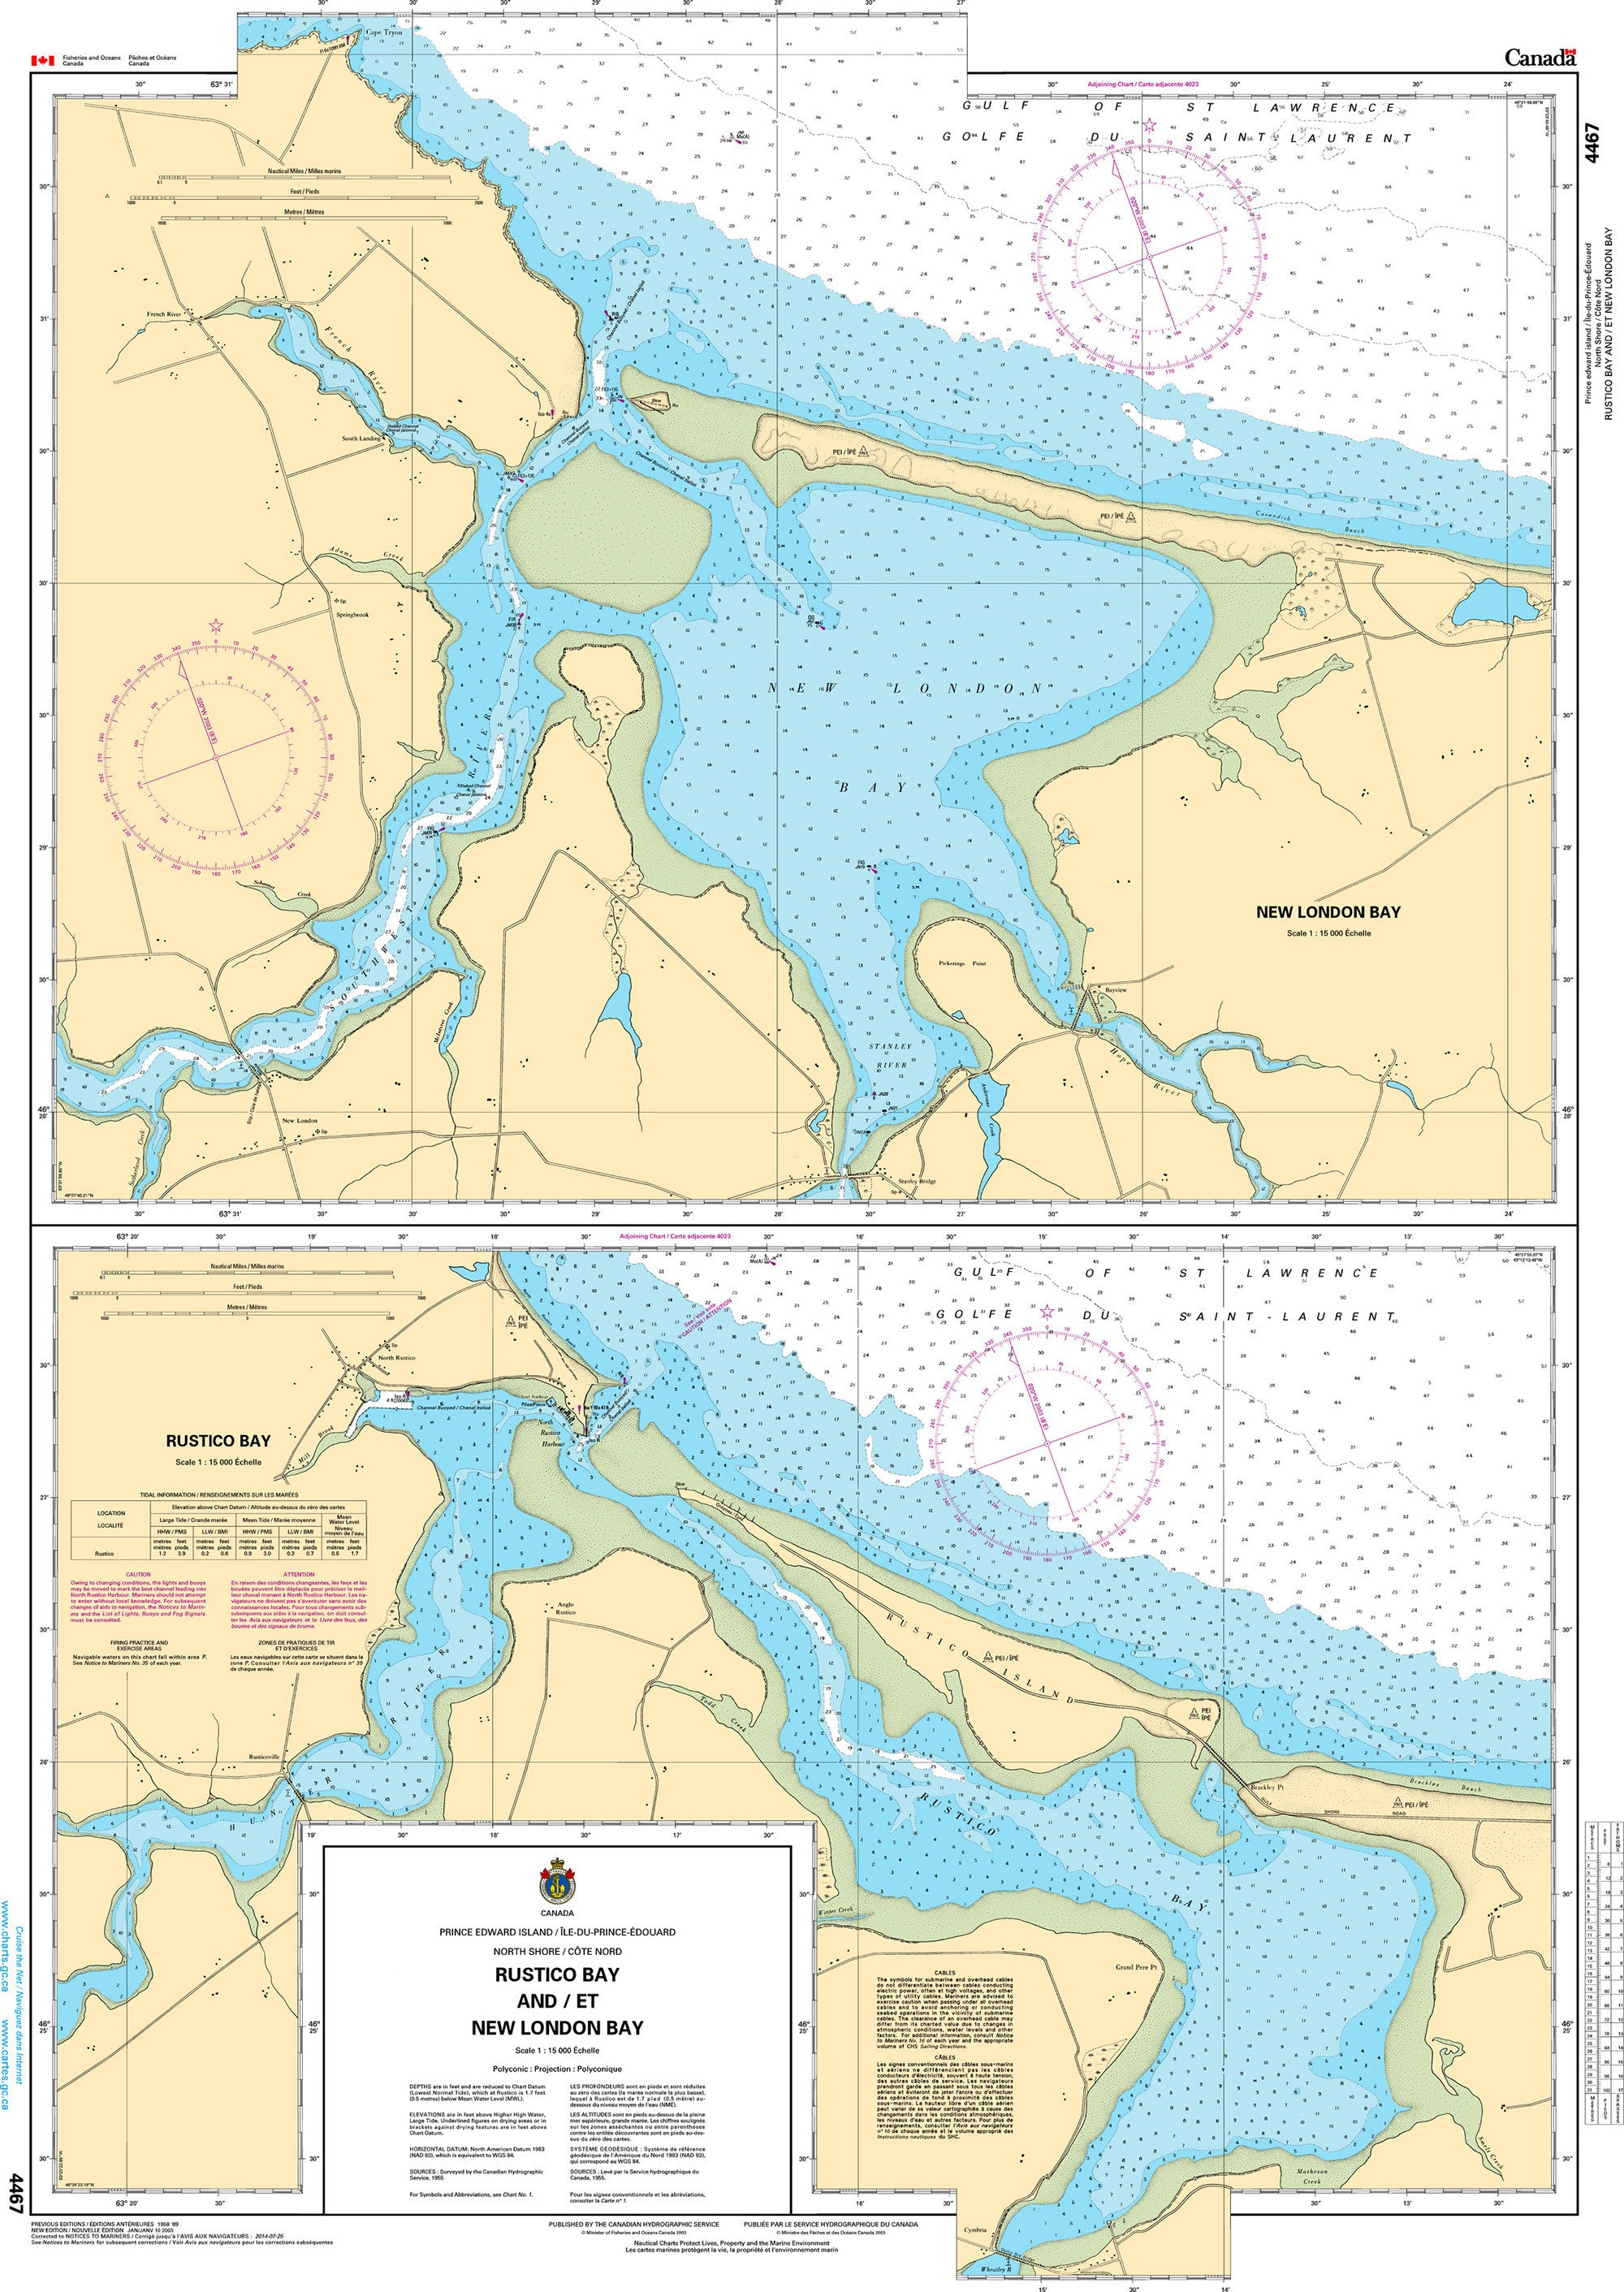 Canadian Hydrographic Service Nautical Chart CHS4467: Rustico Bay and/et New London Bay